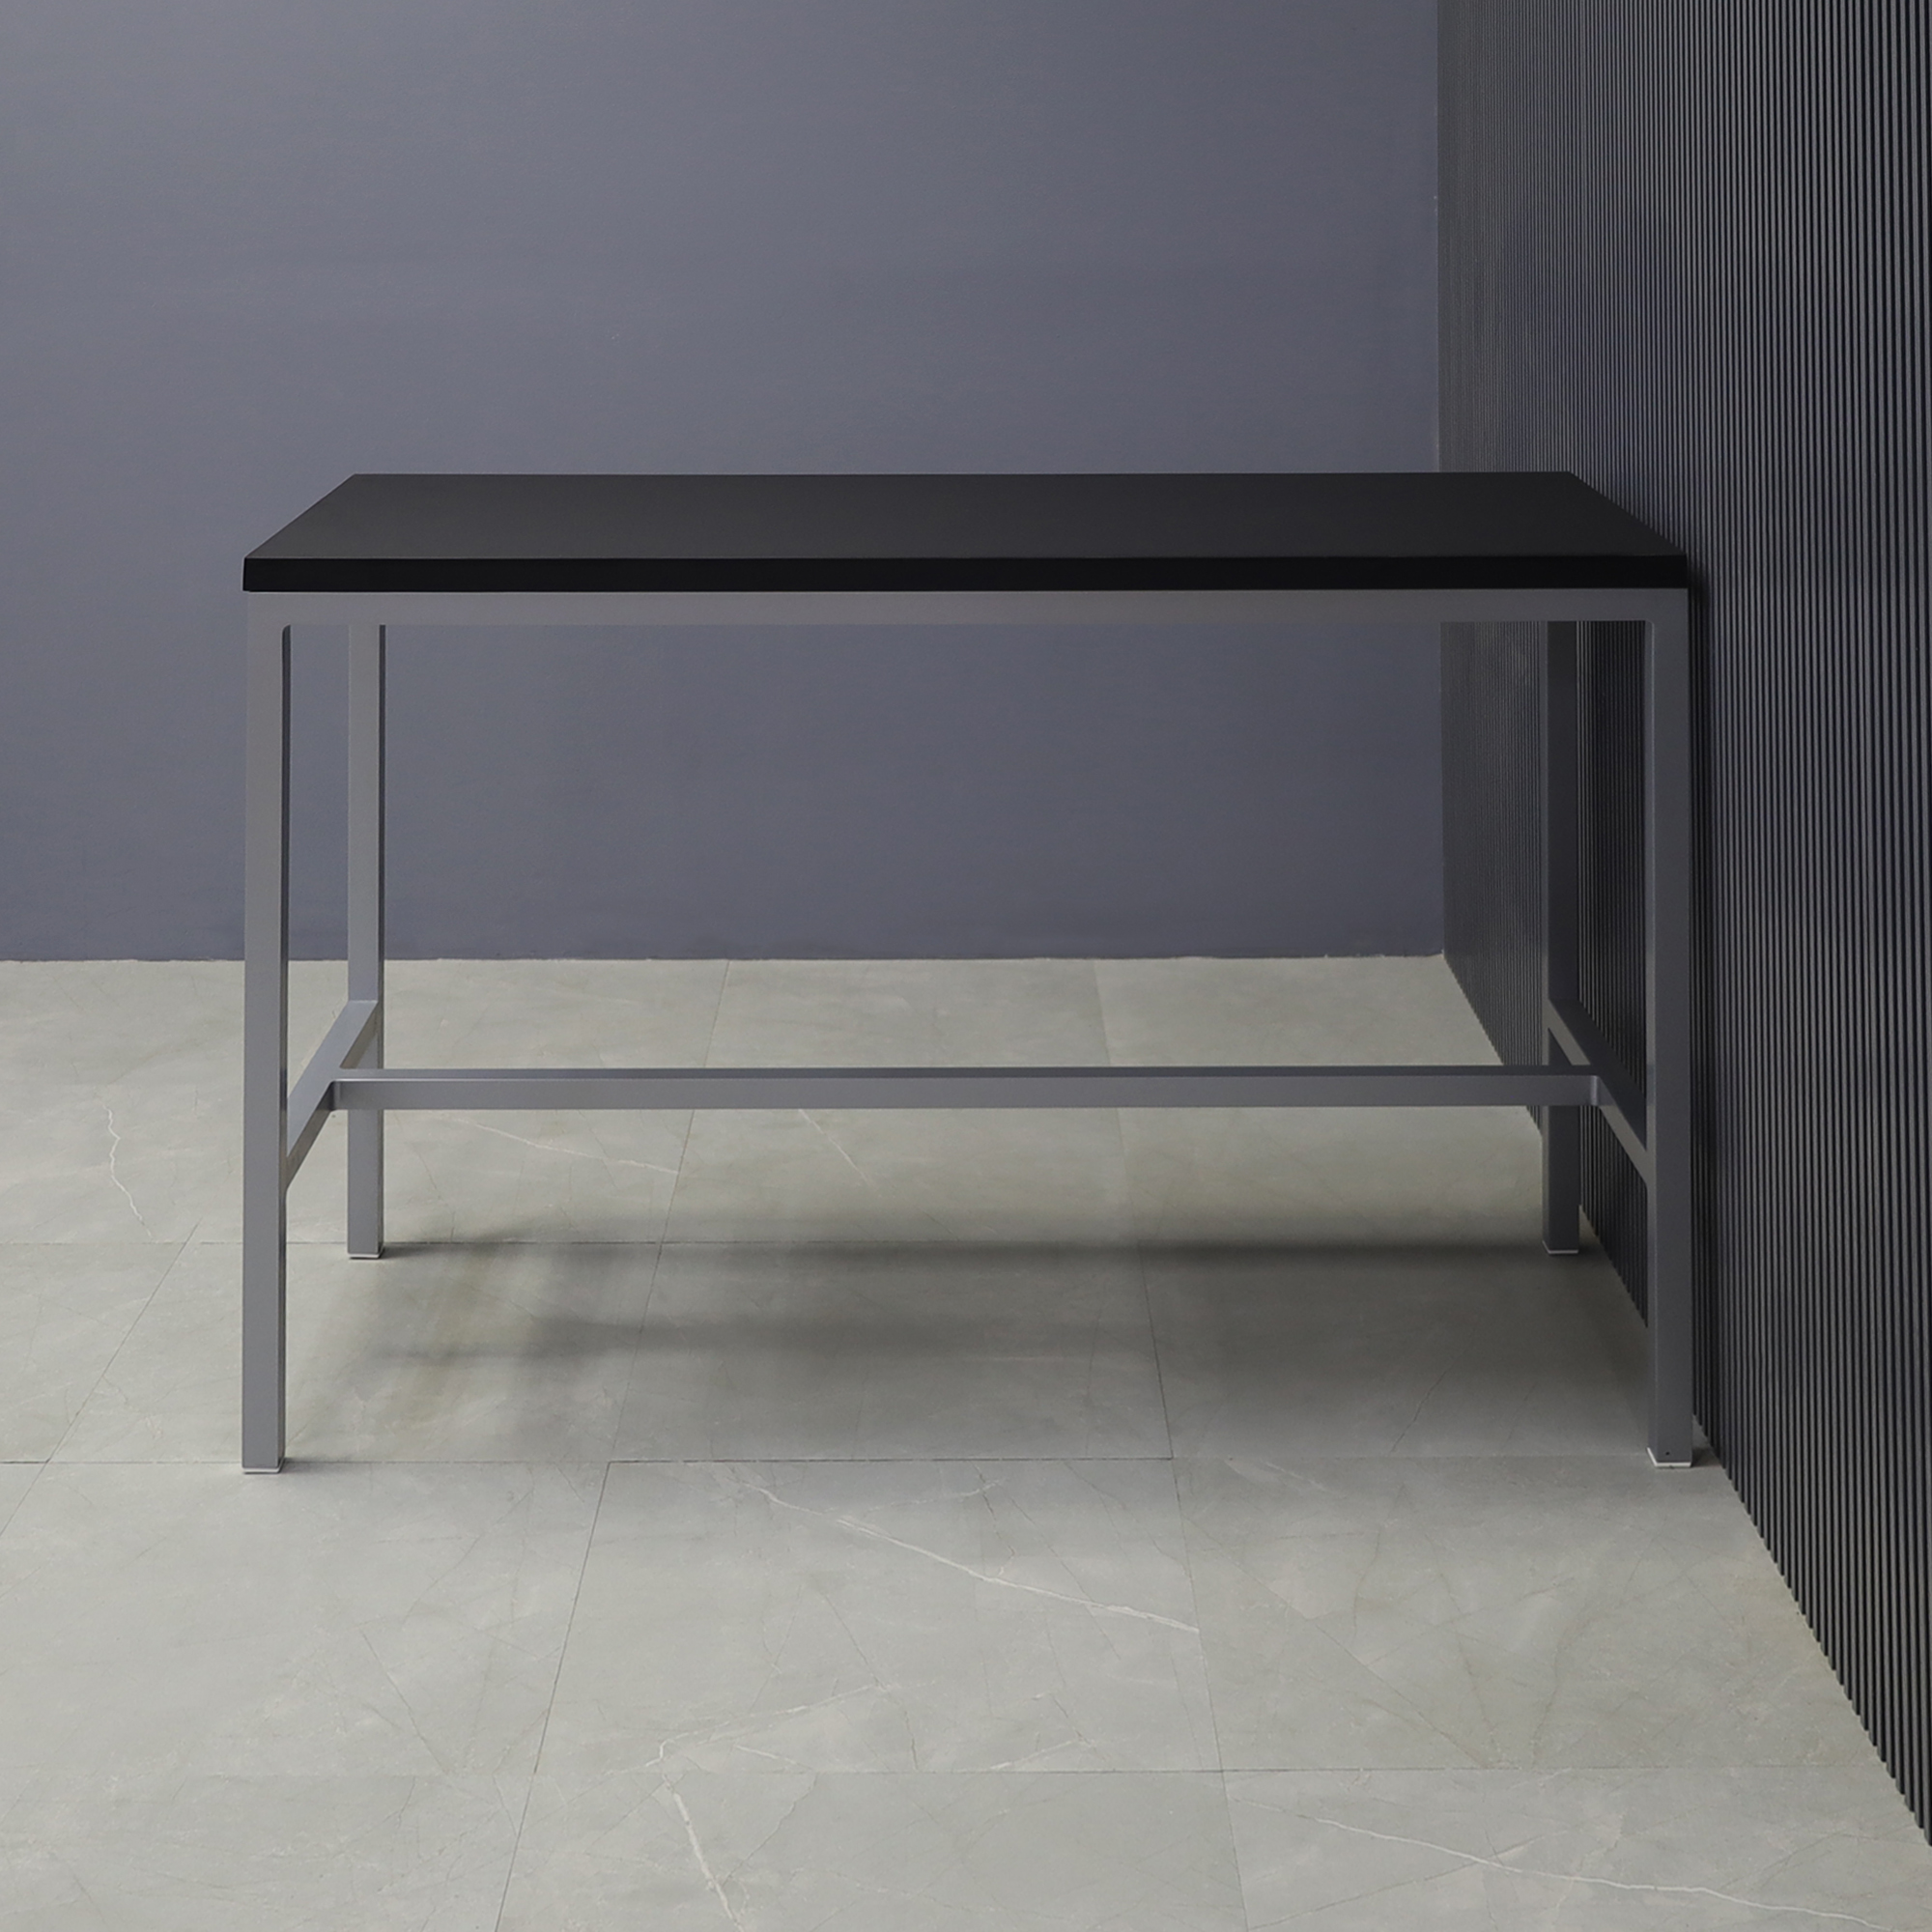 Aspen Bar Table in black traceless laminate top and gray aluminum framing shown here.